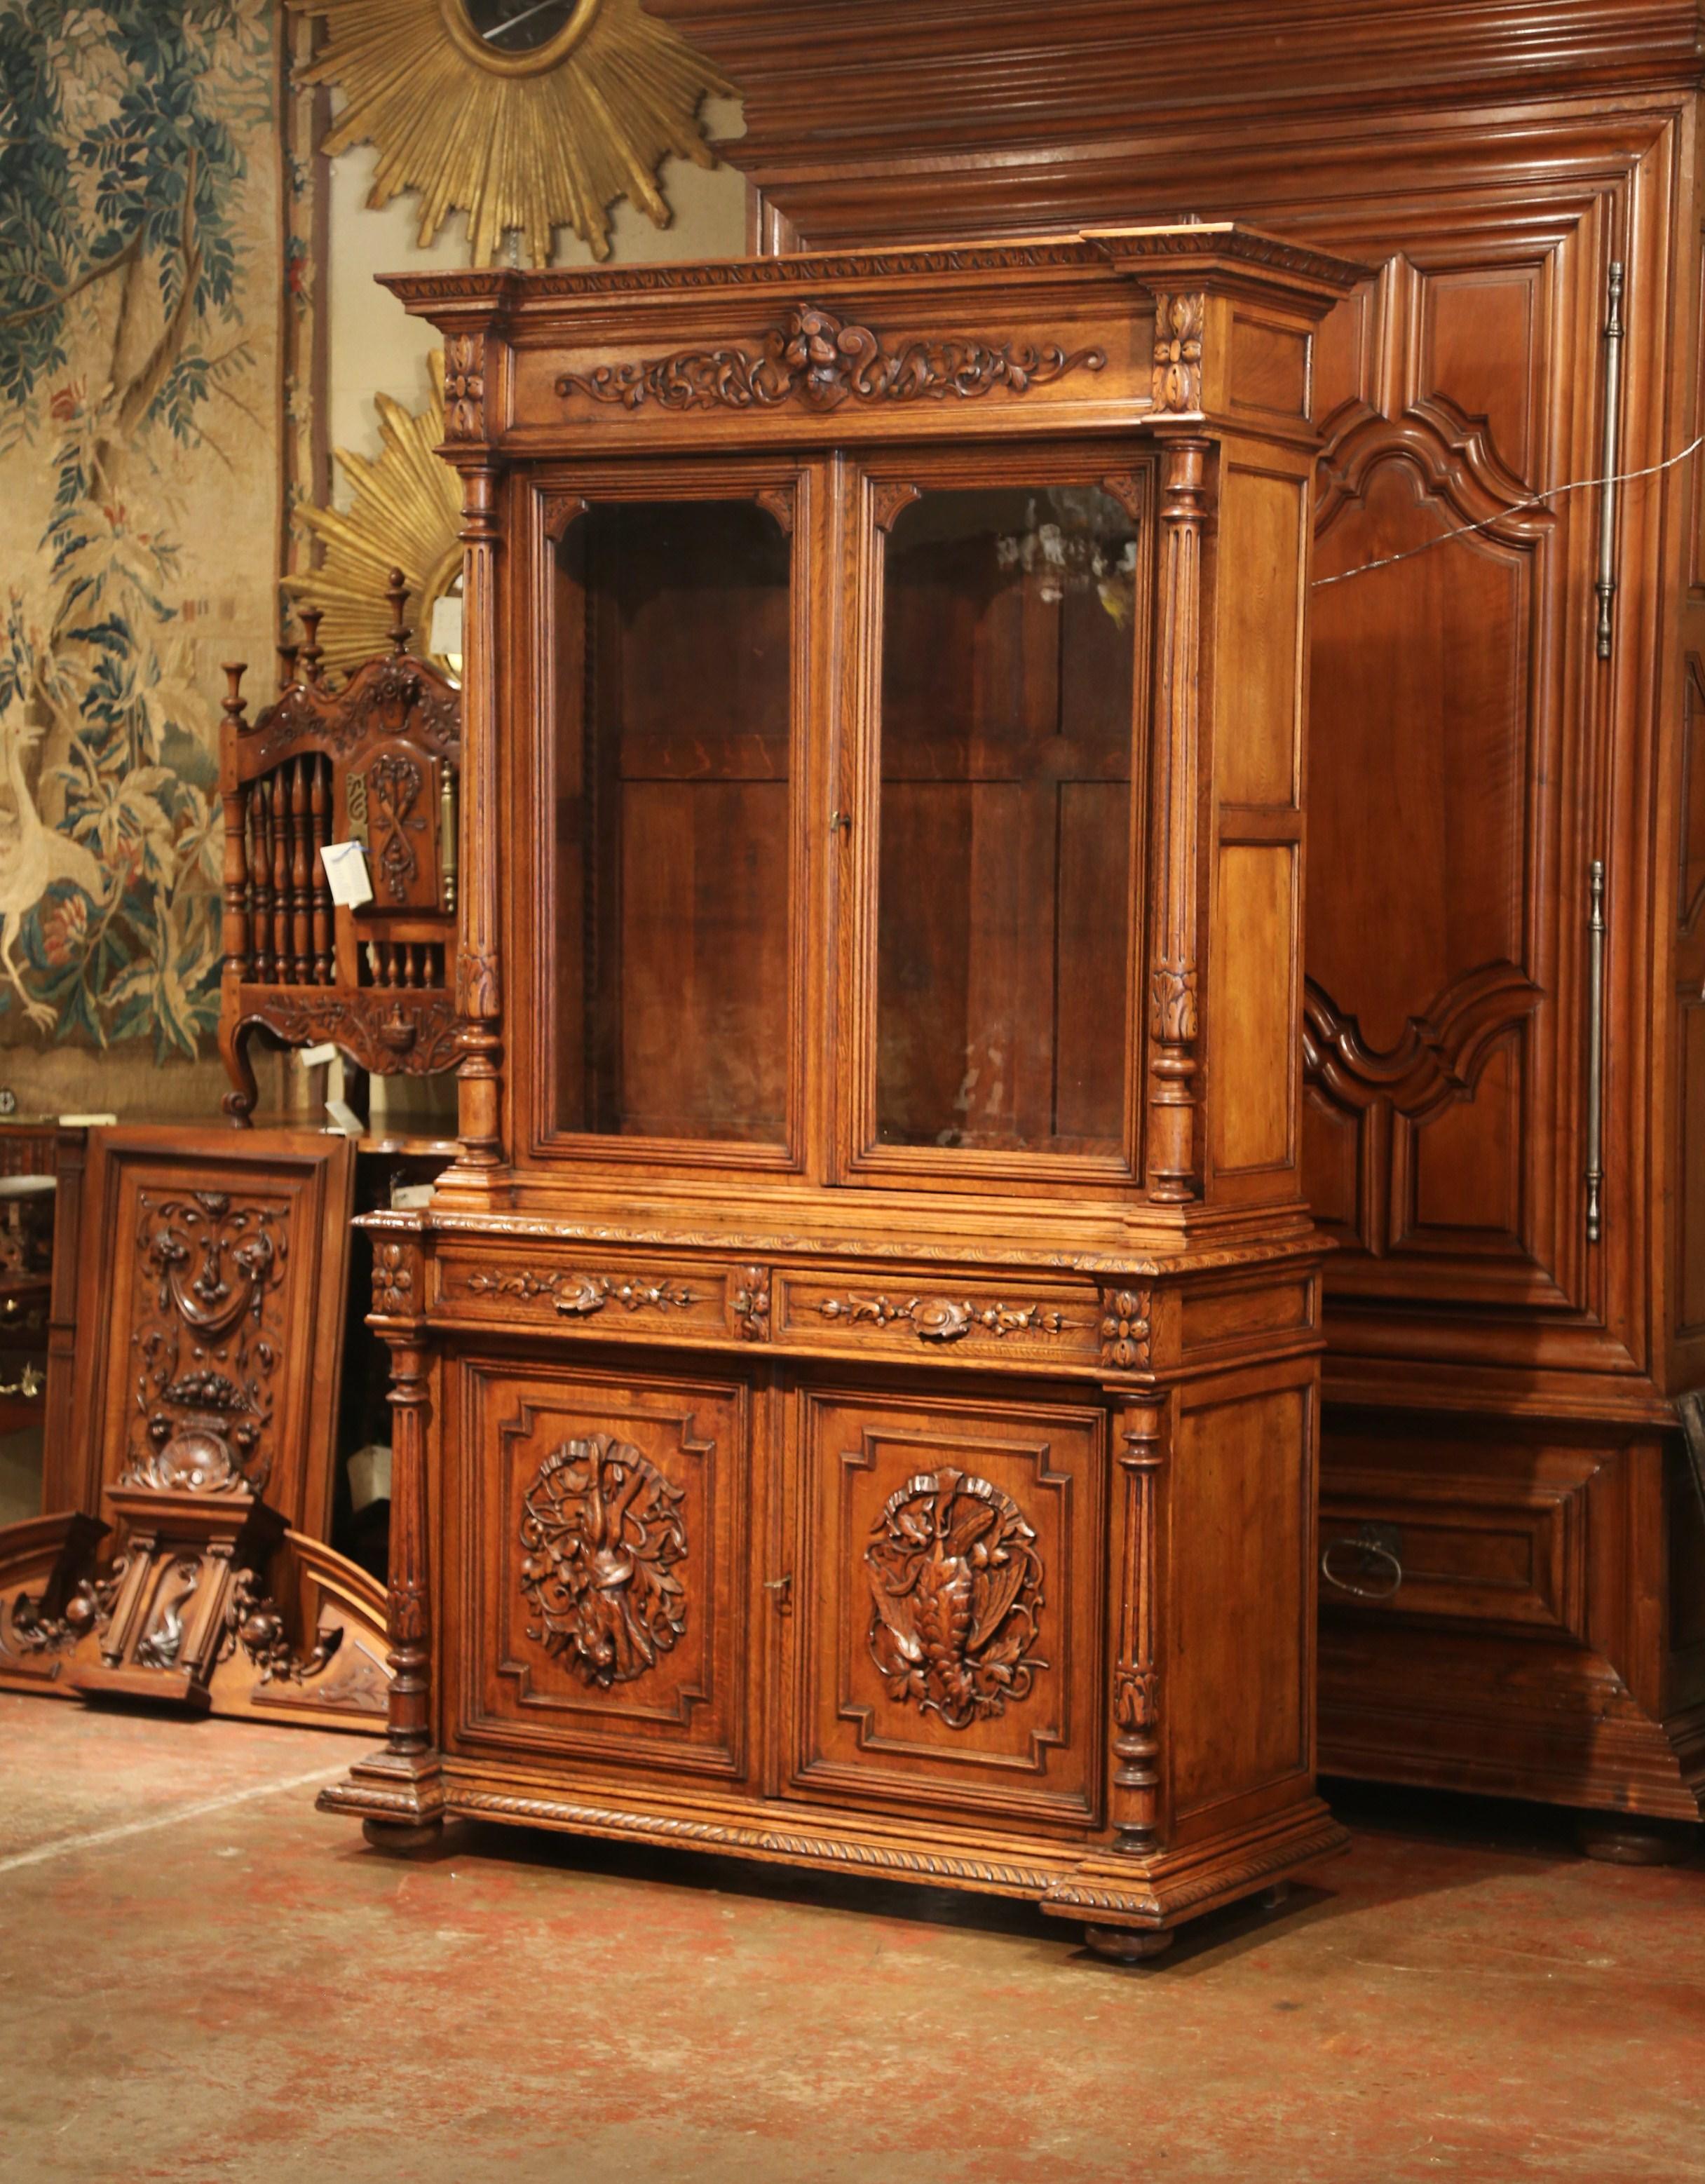 Napoleon III 19th Century French Carved Oak Nine-Gun Display Buffet Cabinet with Hunt Motifs